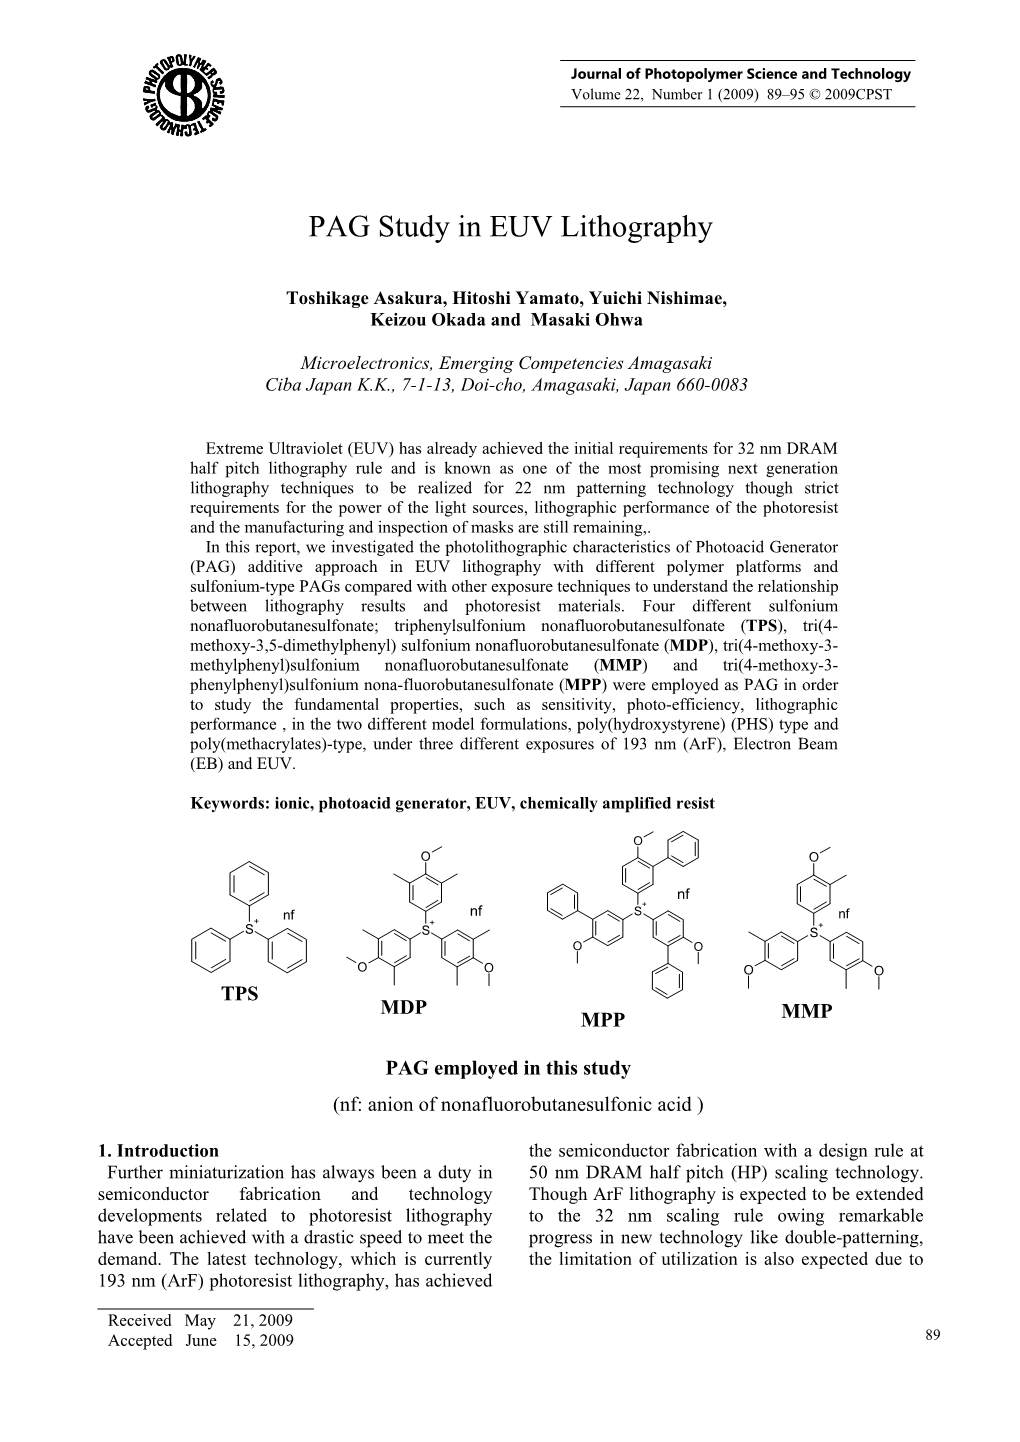 PAG Study in EUV Lithography